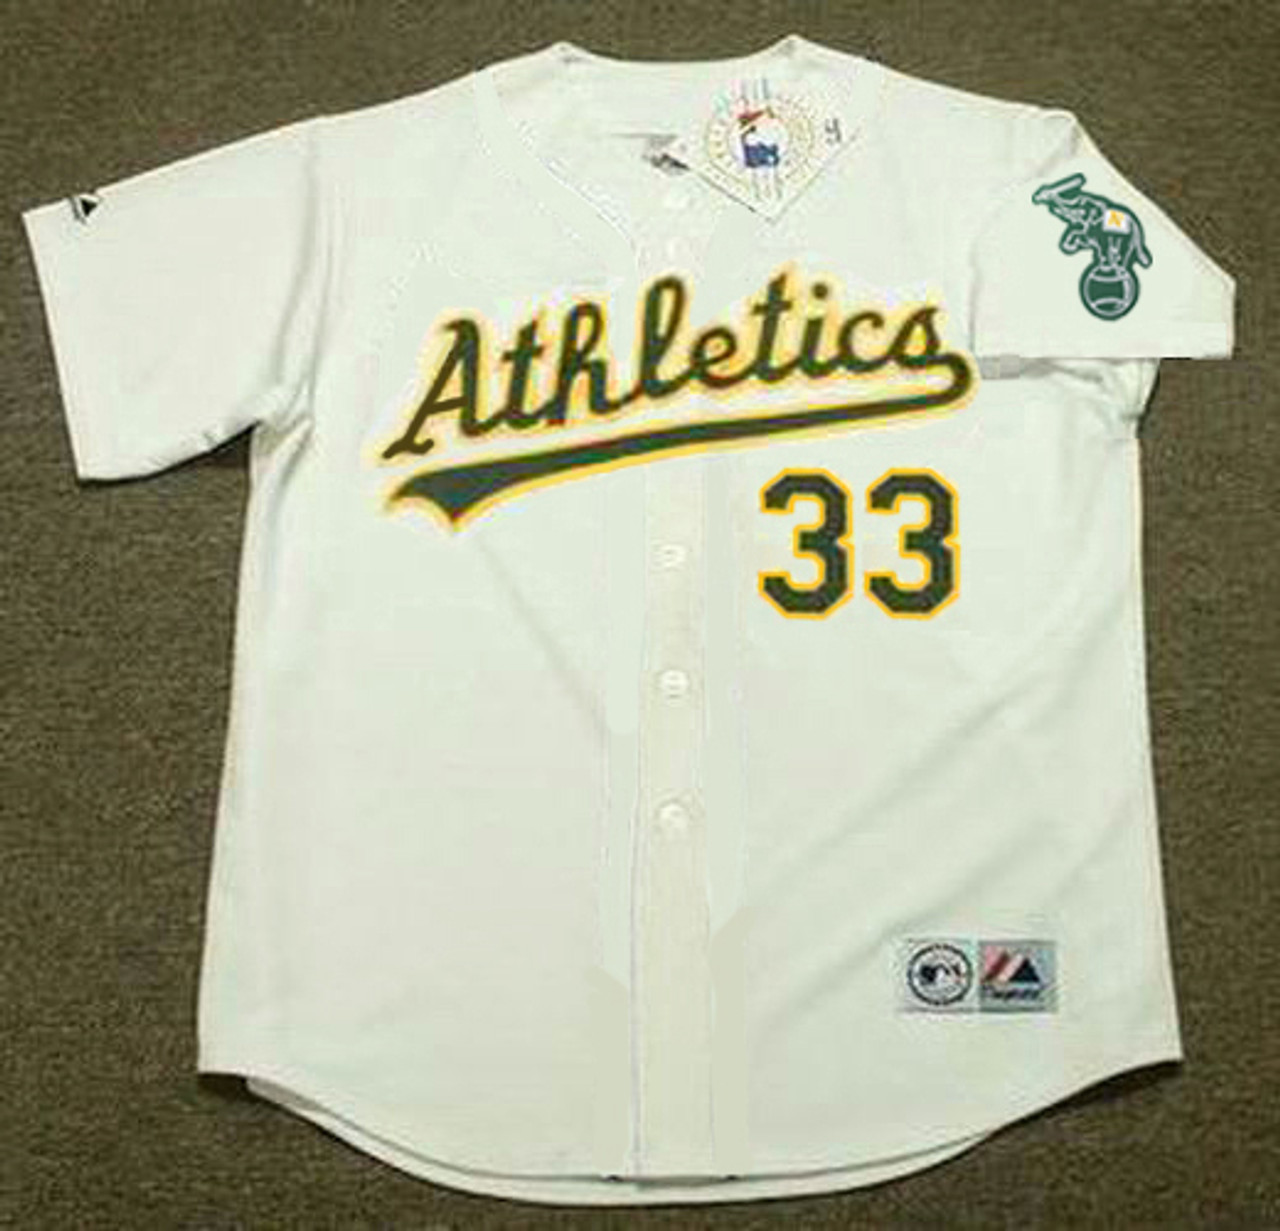 Jose Canseco Oakland Athletics Replica Throwback Jersey